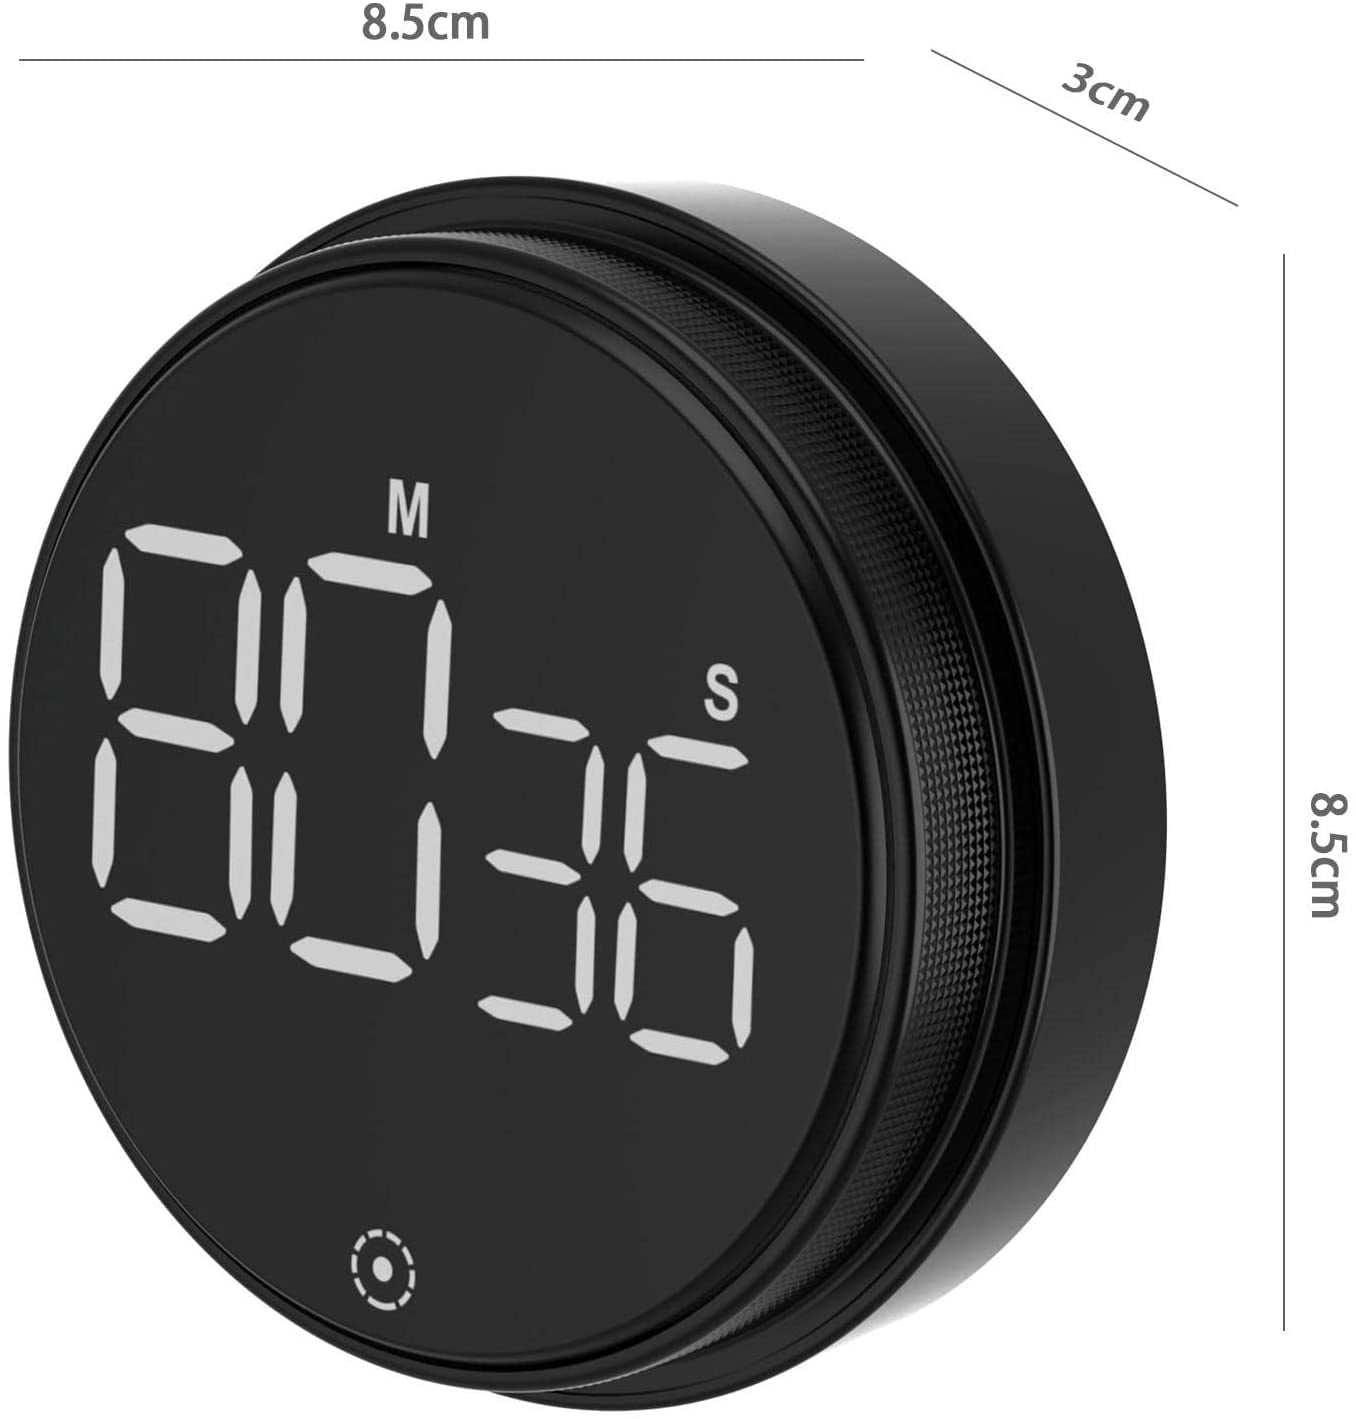 Delaman LED Digital Timer, Countdown Timer with Easy-Clean Metal Knob for Cooking, 3-Level Volume (Mute-90db) Magnetic Timer for Kitchen Walmart.com